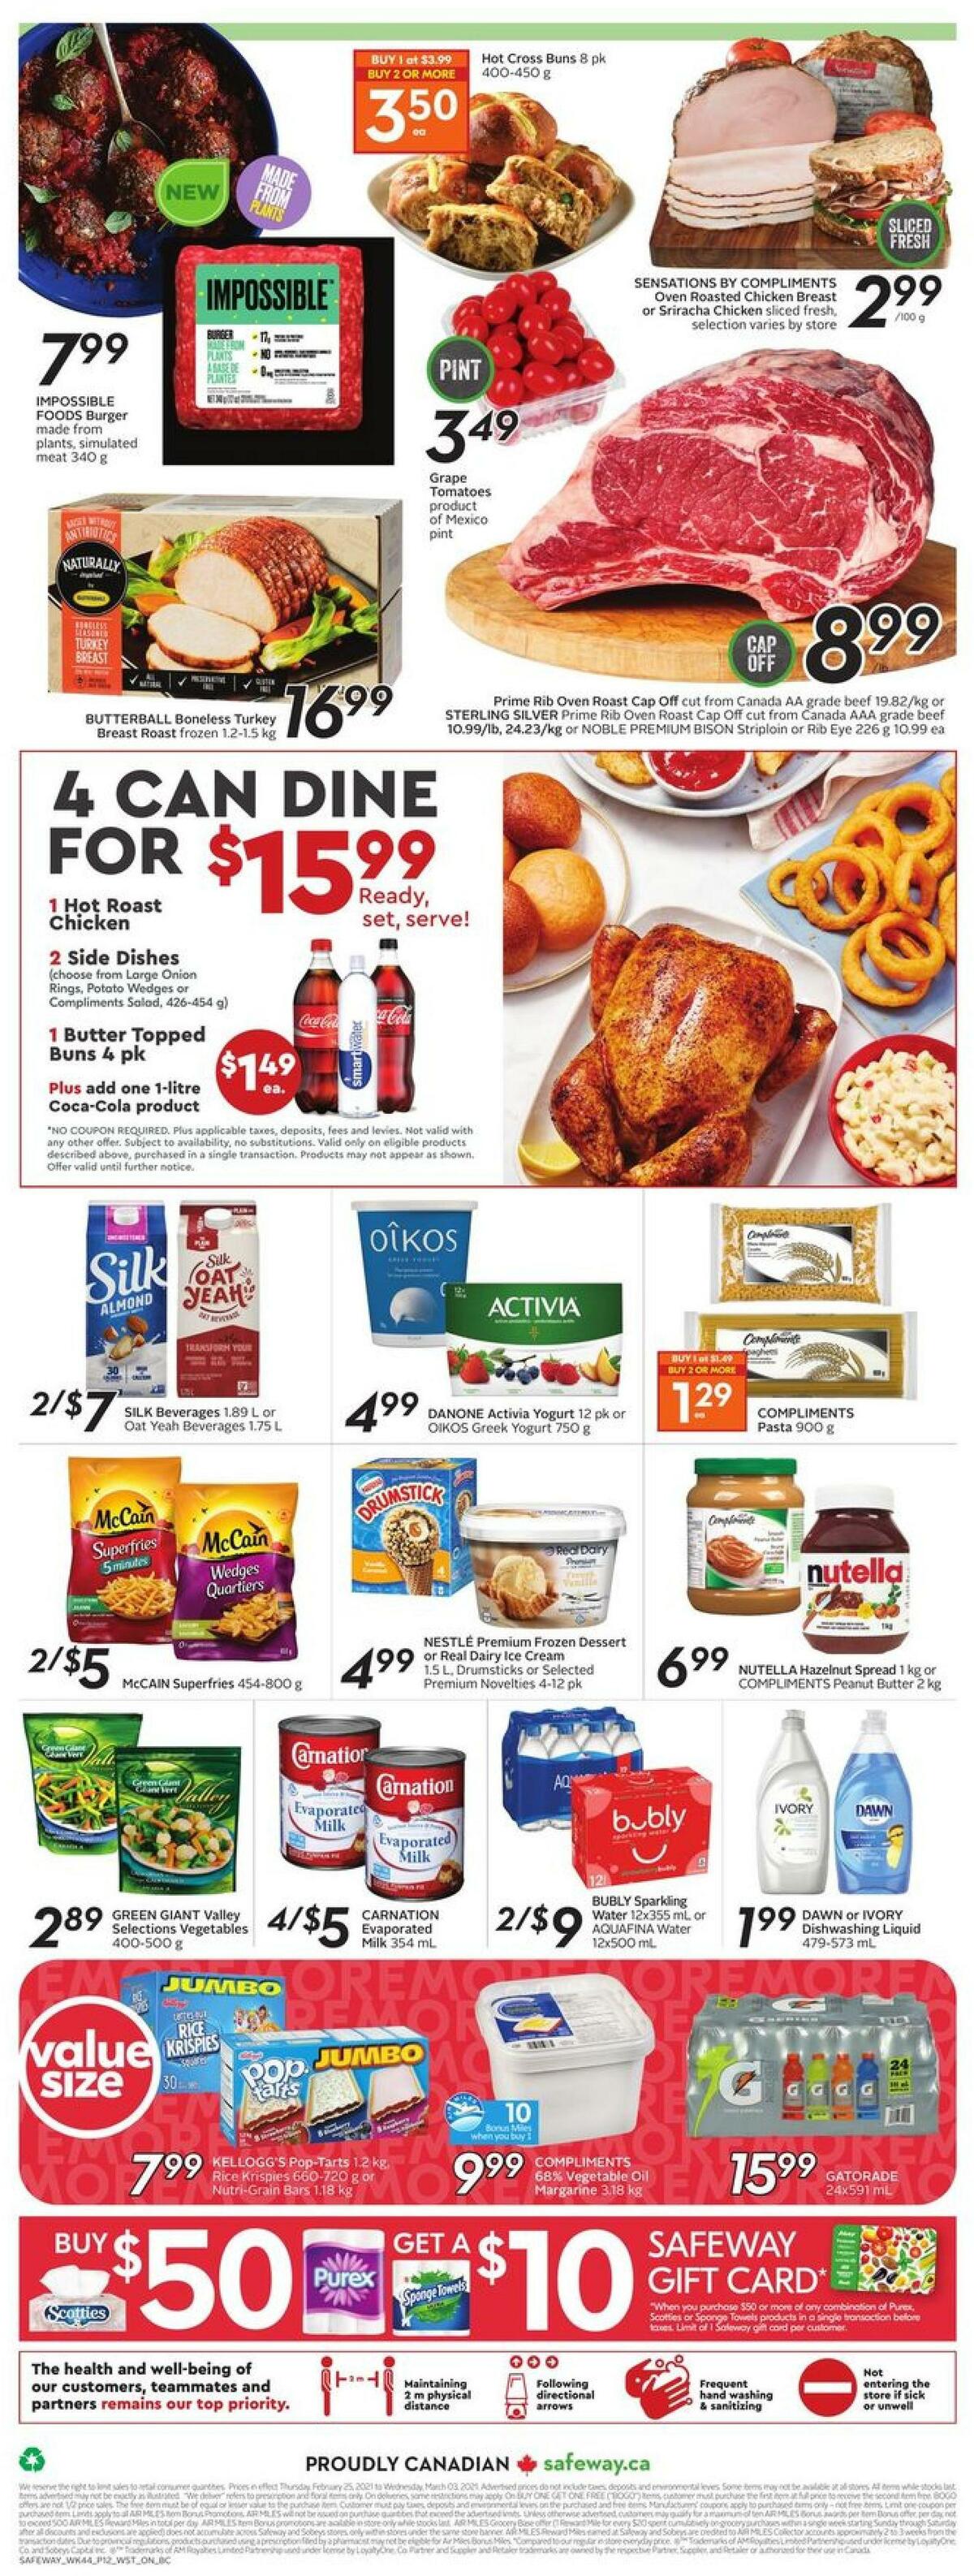 Safeway Flyer from February 25